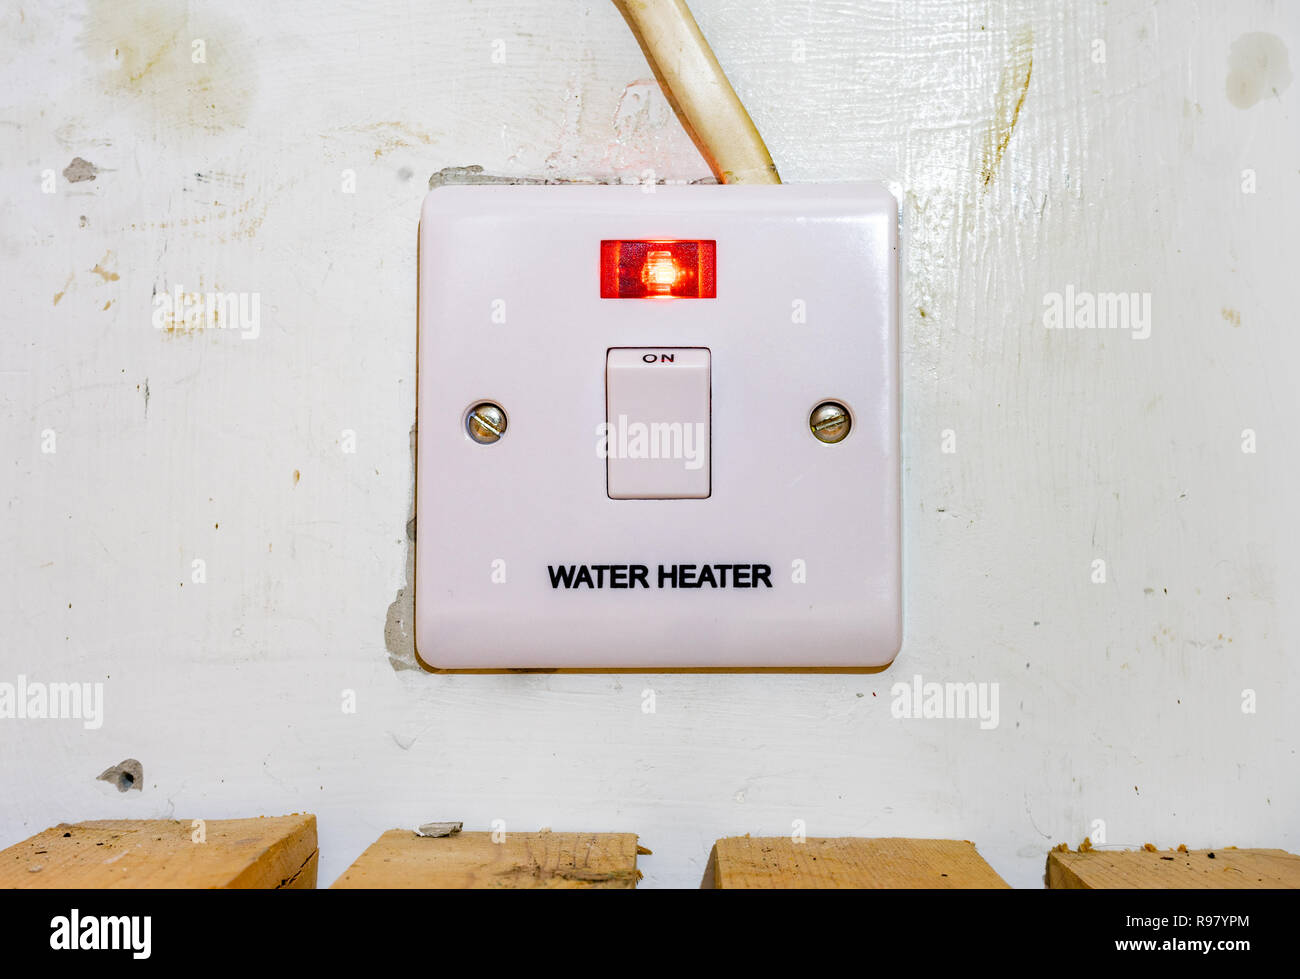 UK Water Heater switch with red light on indicating that it is in use Stock Photo